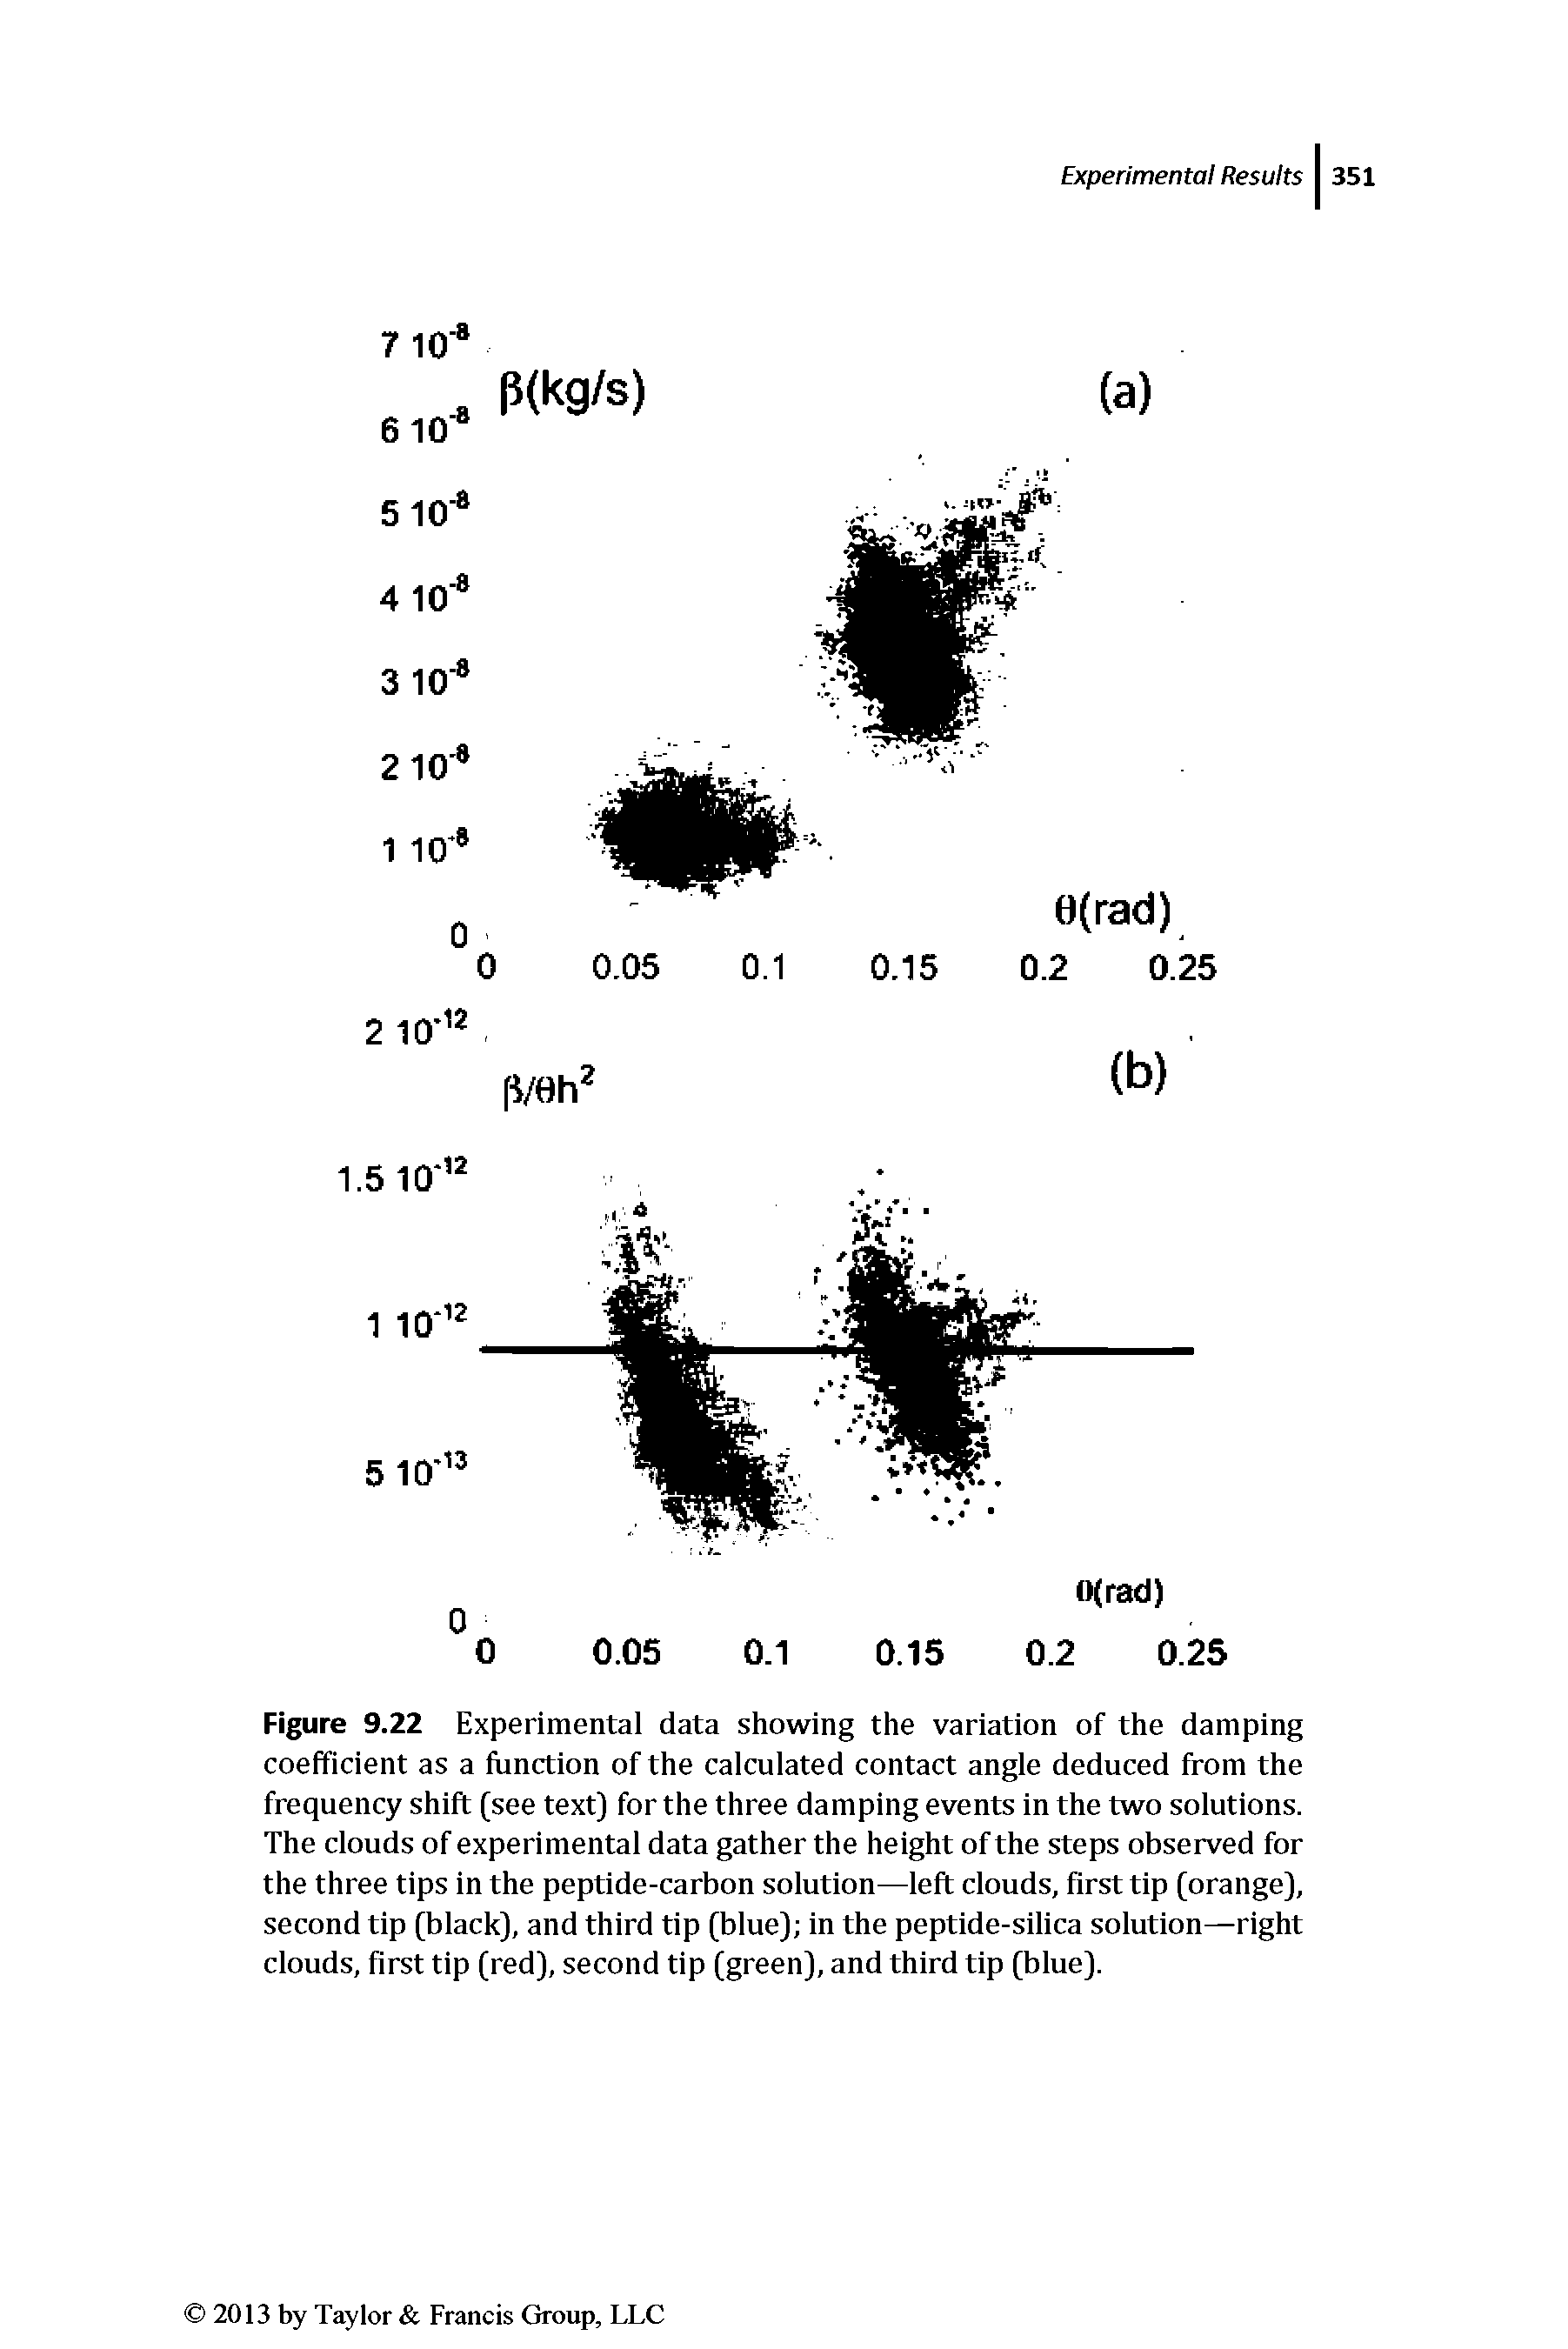 Figure 9.22 Experimental data showing the variation of the damping coefficient as a function of the calculated contact angle deduced from the frequency shift (see text) for the three damping events in the two solutions. The clouds of experimental data gather the height of the steps observed for the three tips in the peptide-carbon solution—left clouds, first tip (orange), second tip (black), and third tip (blue) in the peptide-silica solution—right clouds, first tip (red), second tip (green), and third tip (blue).